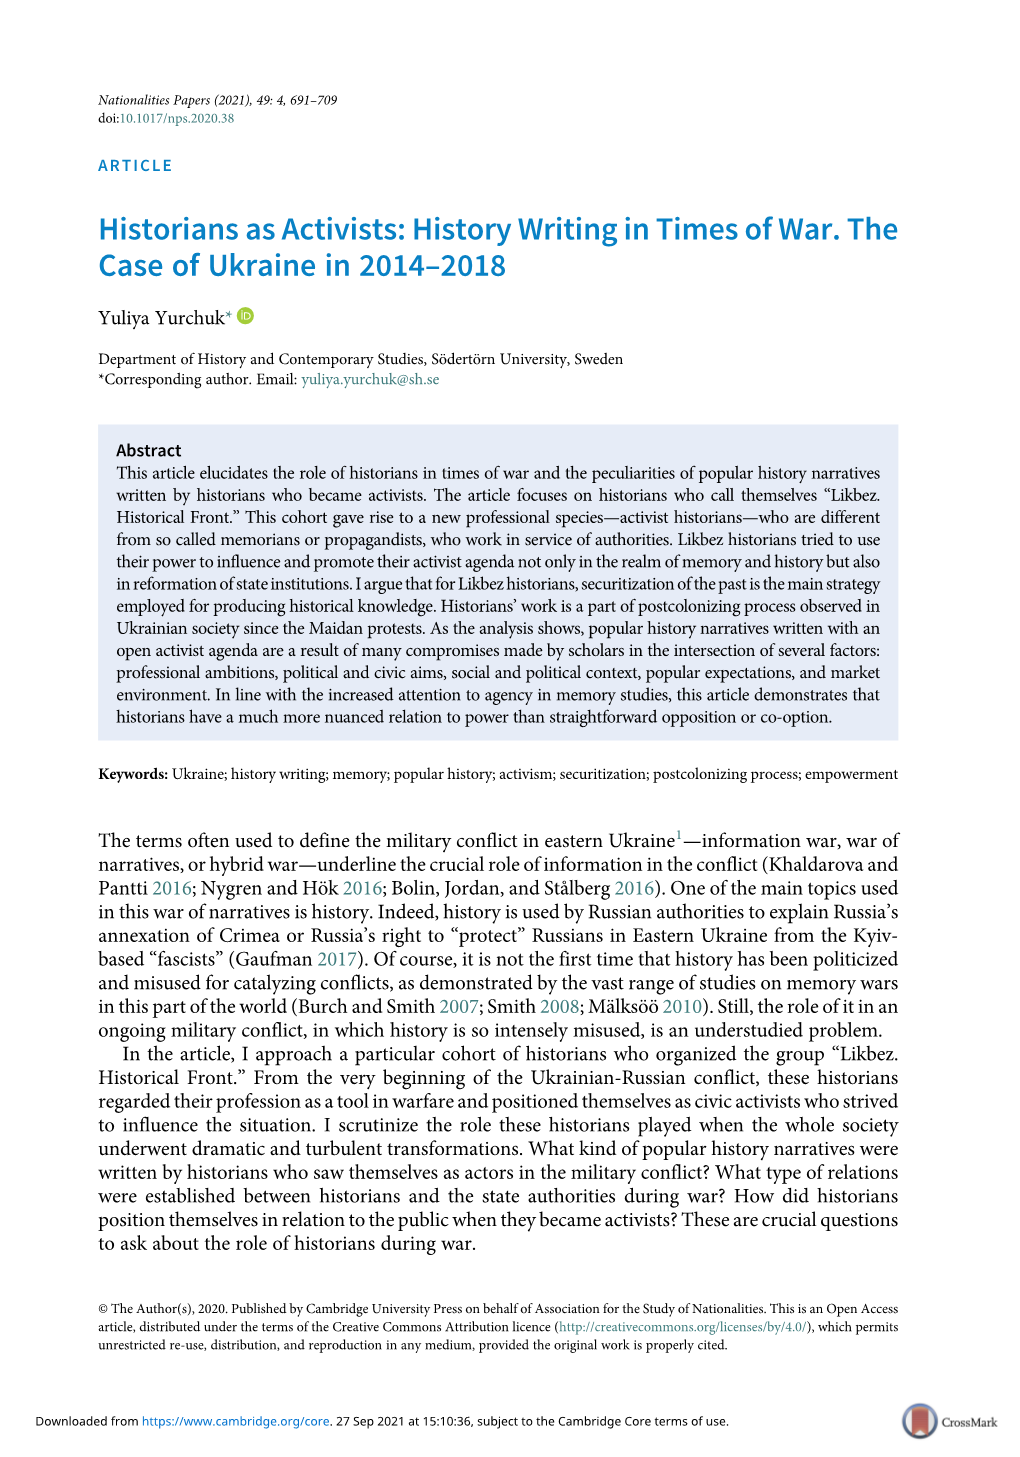 Historians As Activists: History Writing in Times of War. the Case of Ukraine in 2014–2018